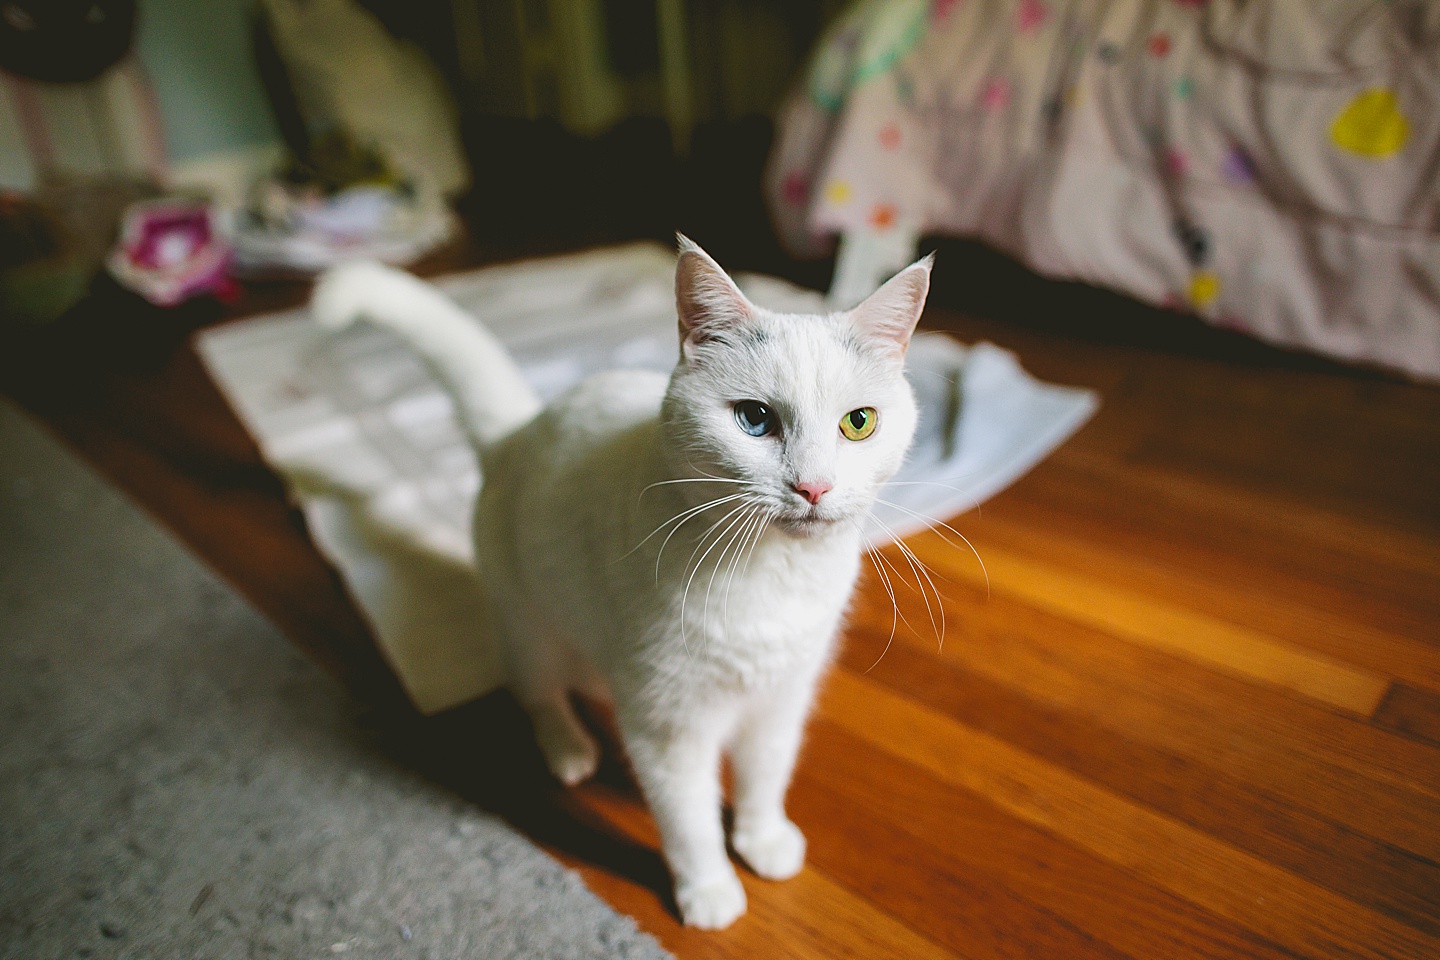 White cat with blue and green eyes